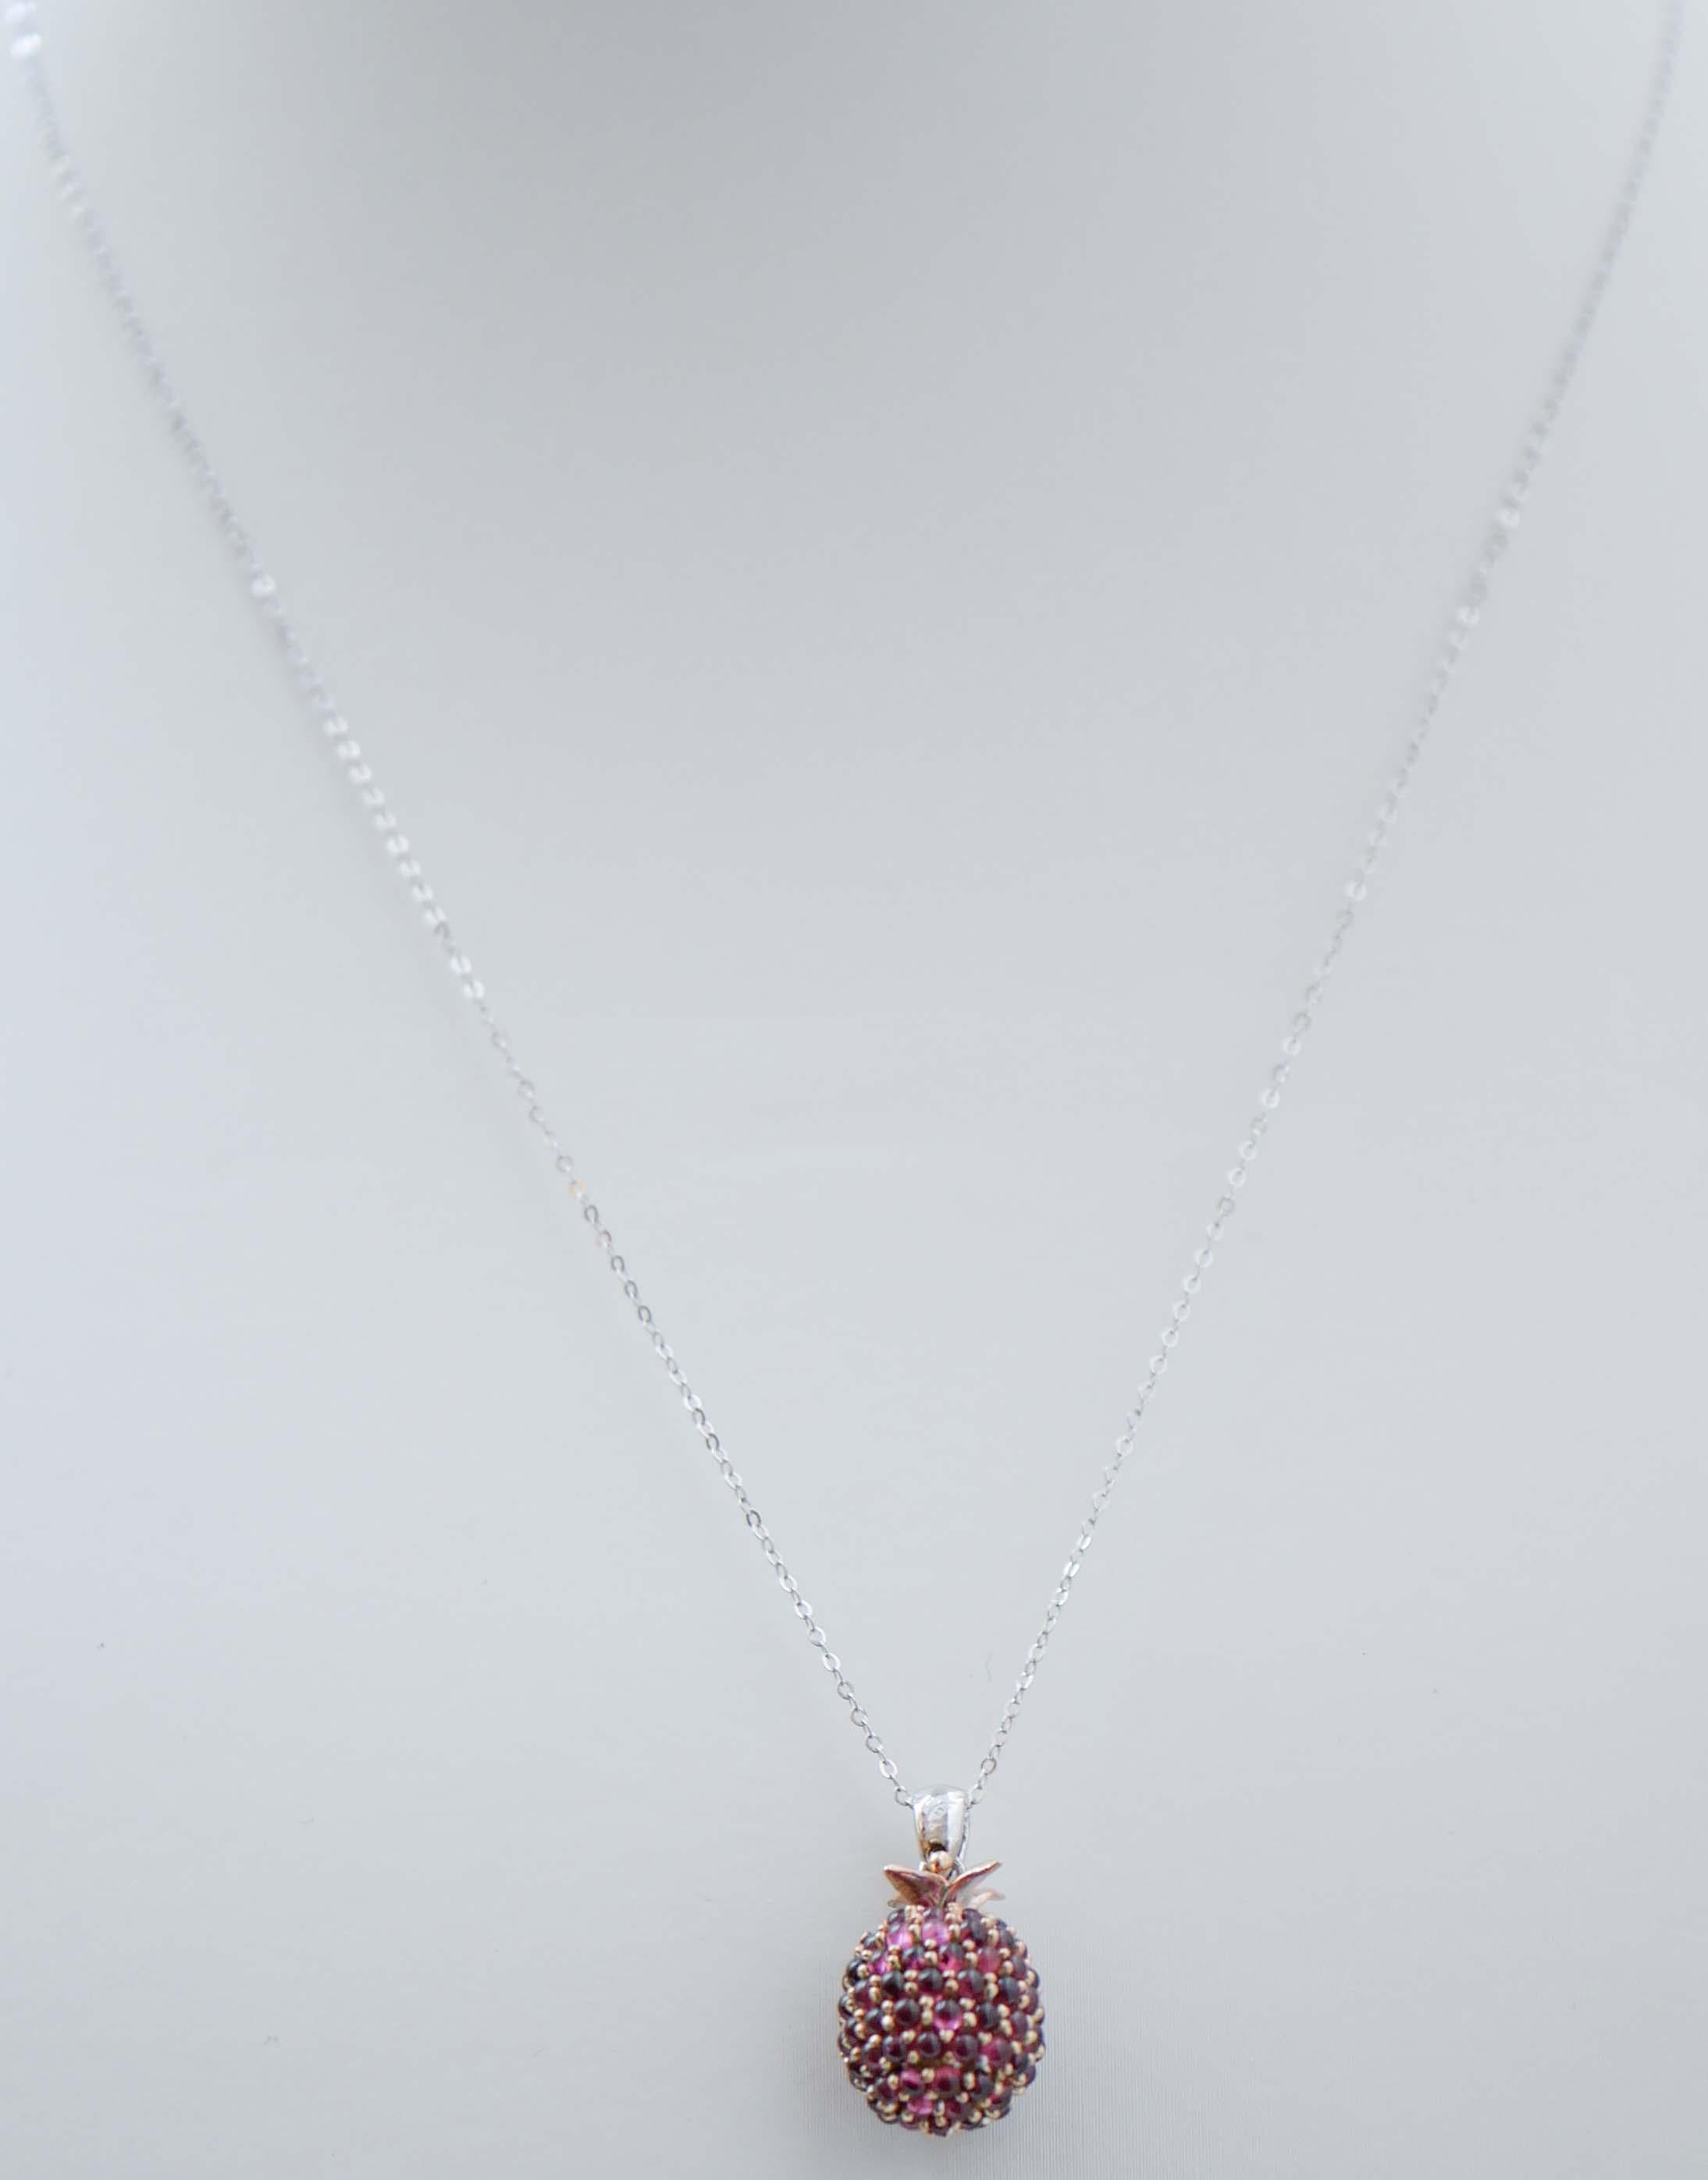 Mixed Cut Garnets, Diamonds, 14 Karat White Gold and Rose Gold Pendant Necklace. For Sale